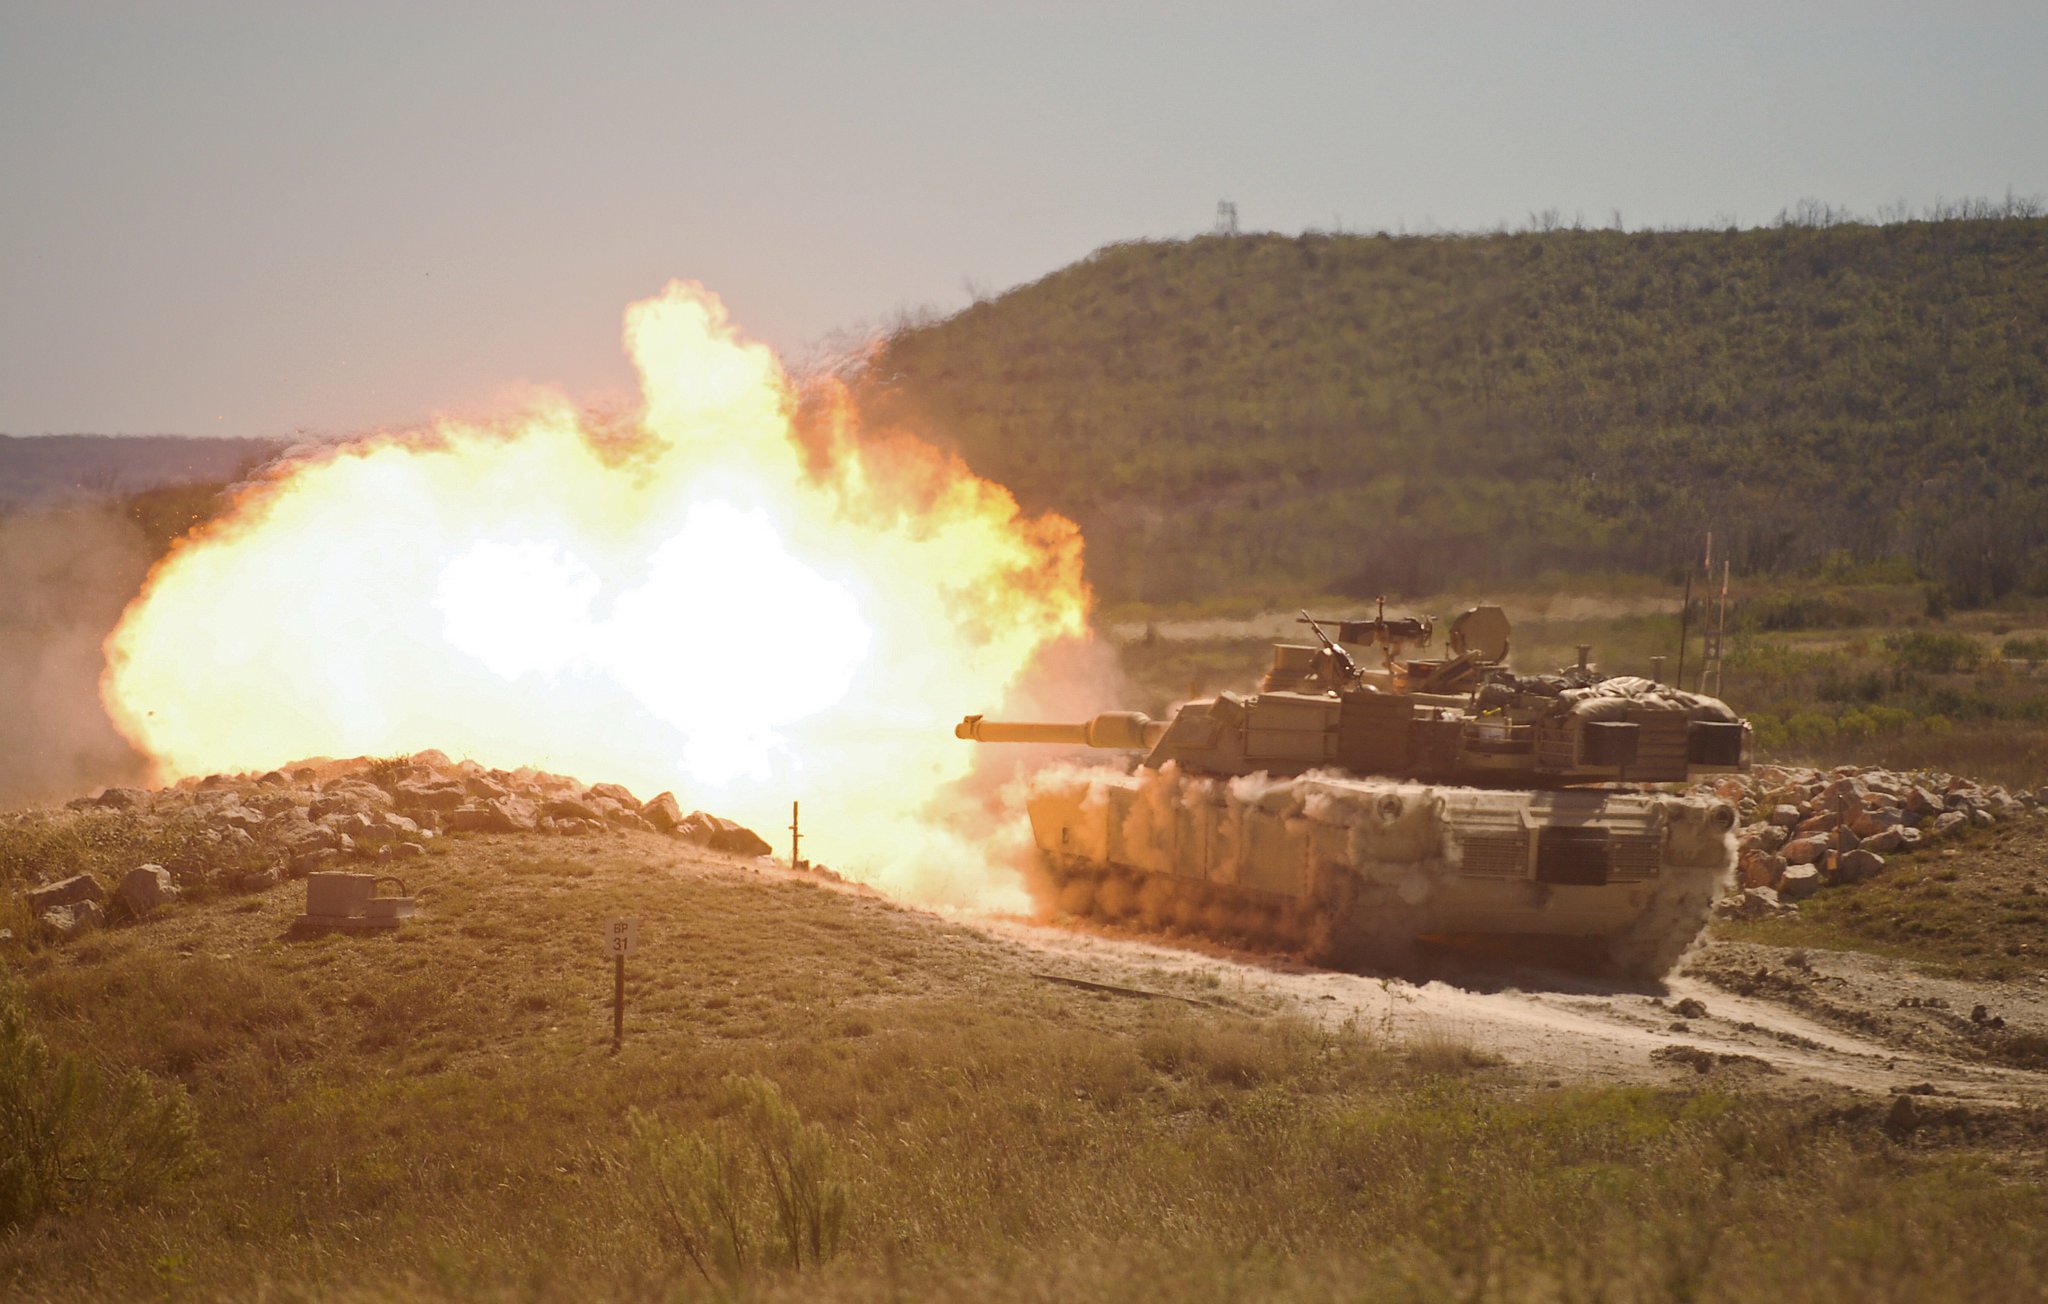 America's Once And Future Tank: The U.S. New M1A2 SEP v.4 Super Abrams